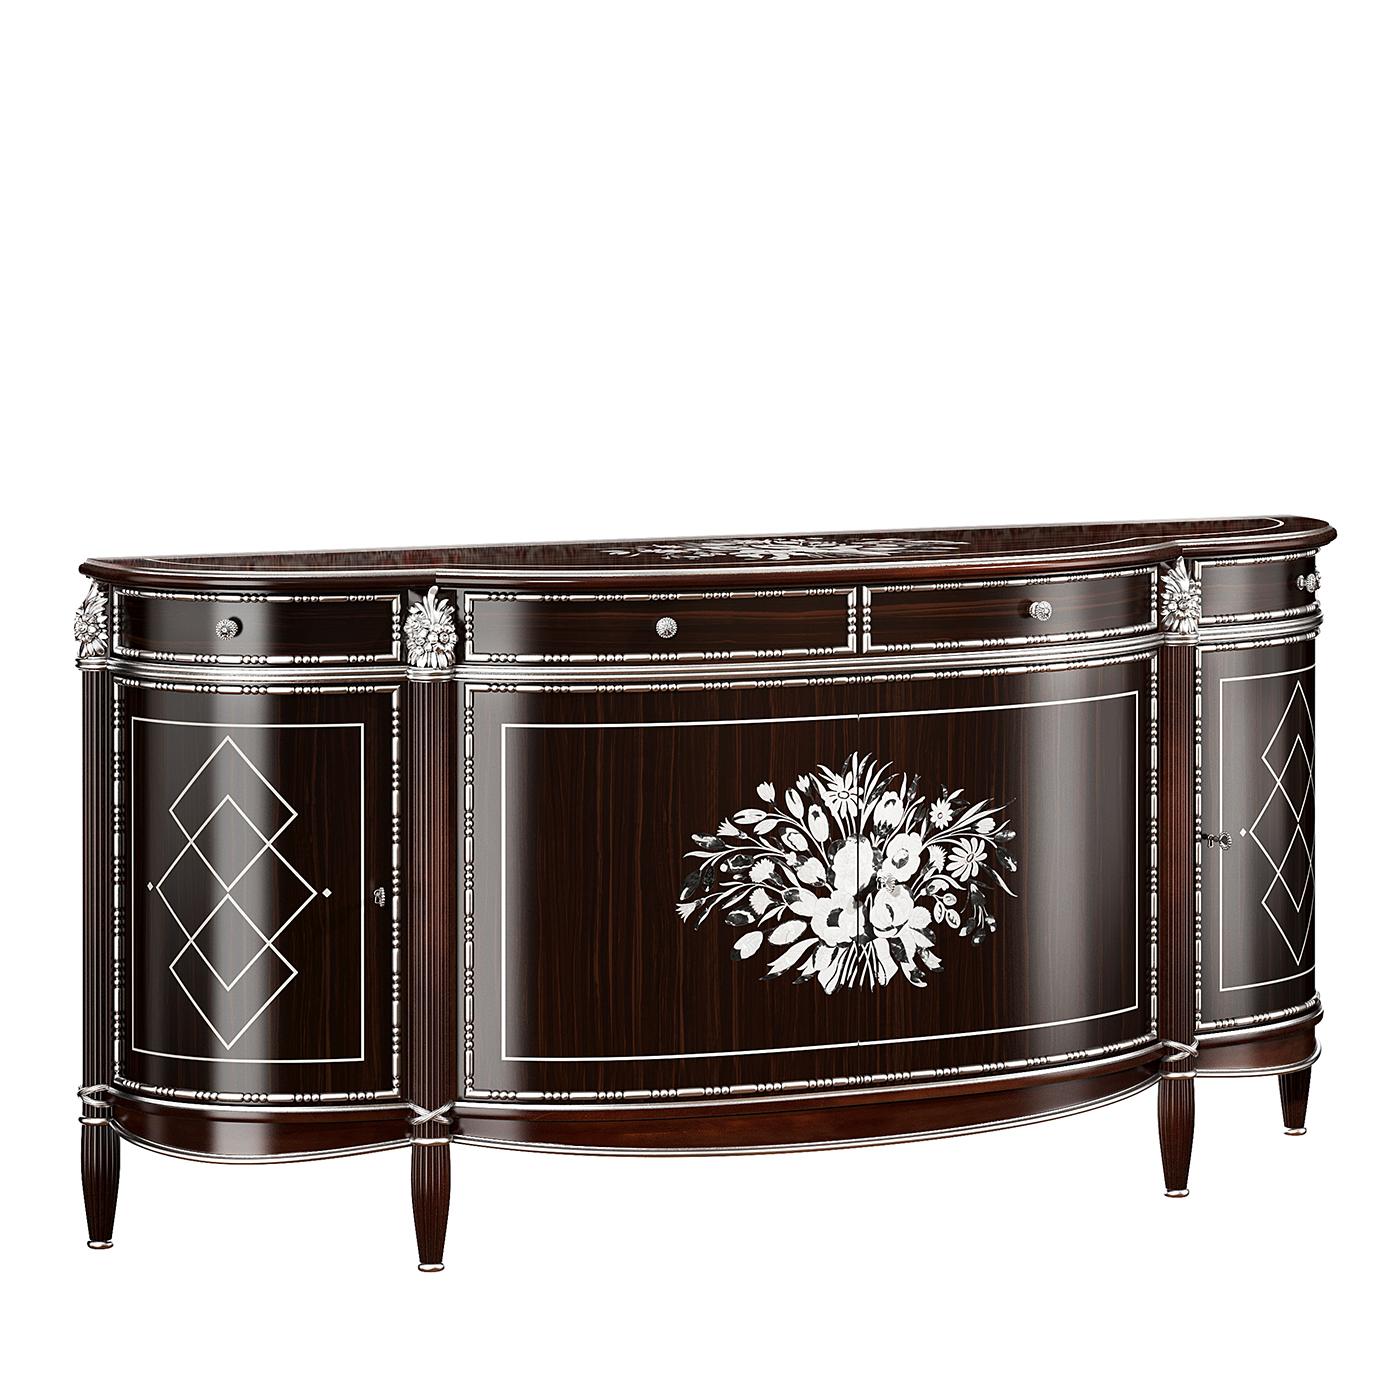 A testament of Art Deco design boasting a plush, sophisticated allure, this sideboard is made of Makassar ebony wood and is enriched with inlay works in white Australia and black Tahiti mother-of-pearl, and silver leaf carvings. The piece features